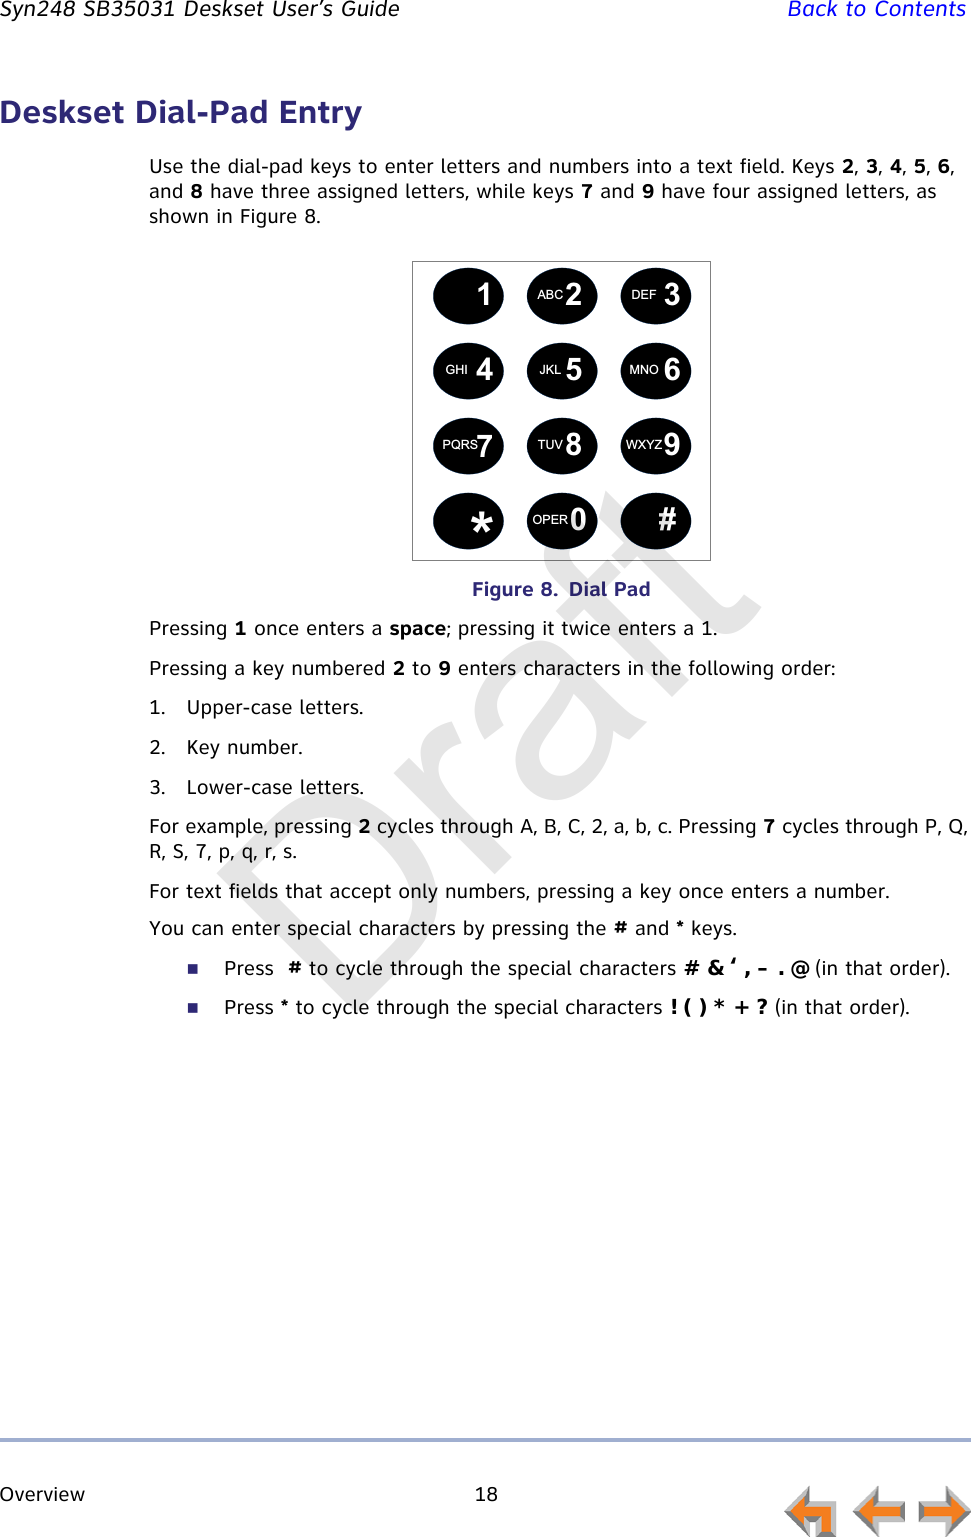 Overview 18         Syn248 SB35031 Deskset User’s Guide Back to ContentsDeskset Dial-Pad EntryUse the dial-pad keys to enter letters and numbers into a text field. Keys 2, 3, 4, 5, 6, and 8 have three assigned letters, while keys 7 and 9 have four assigned letters, as shown in Figure 8.Figure 8.  Dial PadPressing 1 once enters a space; pressing it twice enters a 1.Pressing a key numbered 2 to 9 enters characters in the following order:1. Upper-case letters.2. Key number.3. Lower-case letters.For example, pressing 2 cycles through A, B, C, 2, a, b, c. Pressing 7 cycles through P, Q, R, S, 7, p, q, r, s.For text fields that accept only numbers, pressing a key once enters a number.You can enter special characters by pressing the # and * keys.Press  # to cycle through the special characters # &amp; ‘ , – . @ (in that order).Press * to cycle through the special characters ! ( ) * + ? (in that order).12 345 67890ABC DEFGHI JKL MNOPQRS TUV WXYZOPER#*Draft